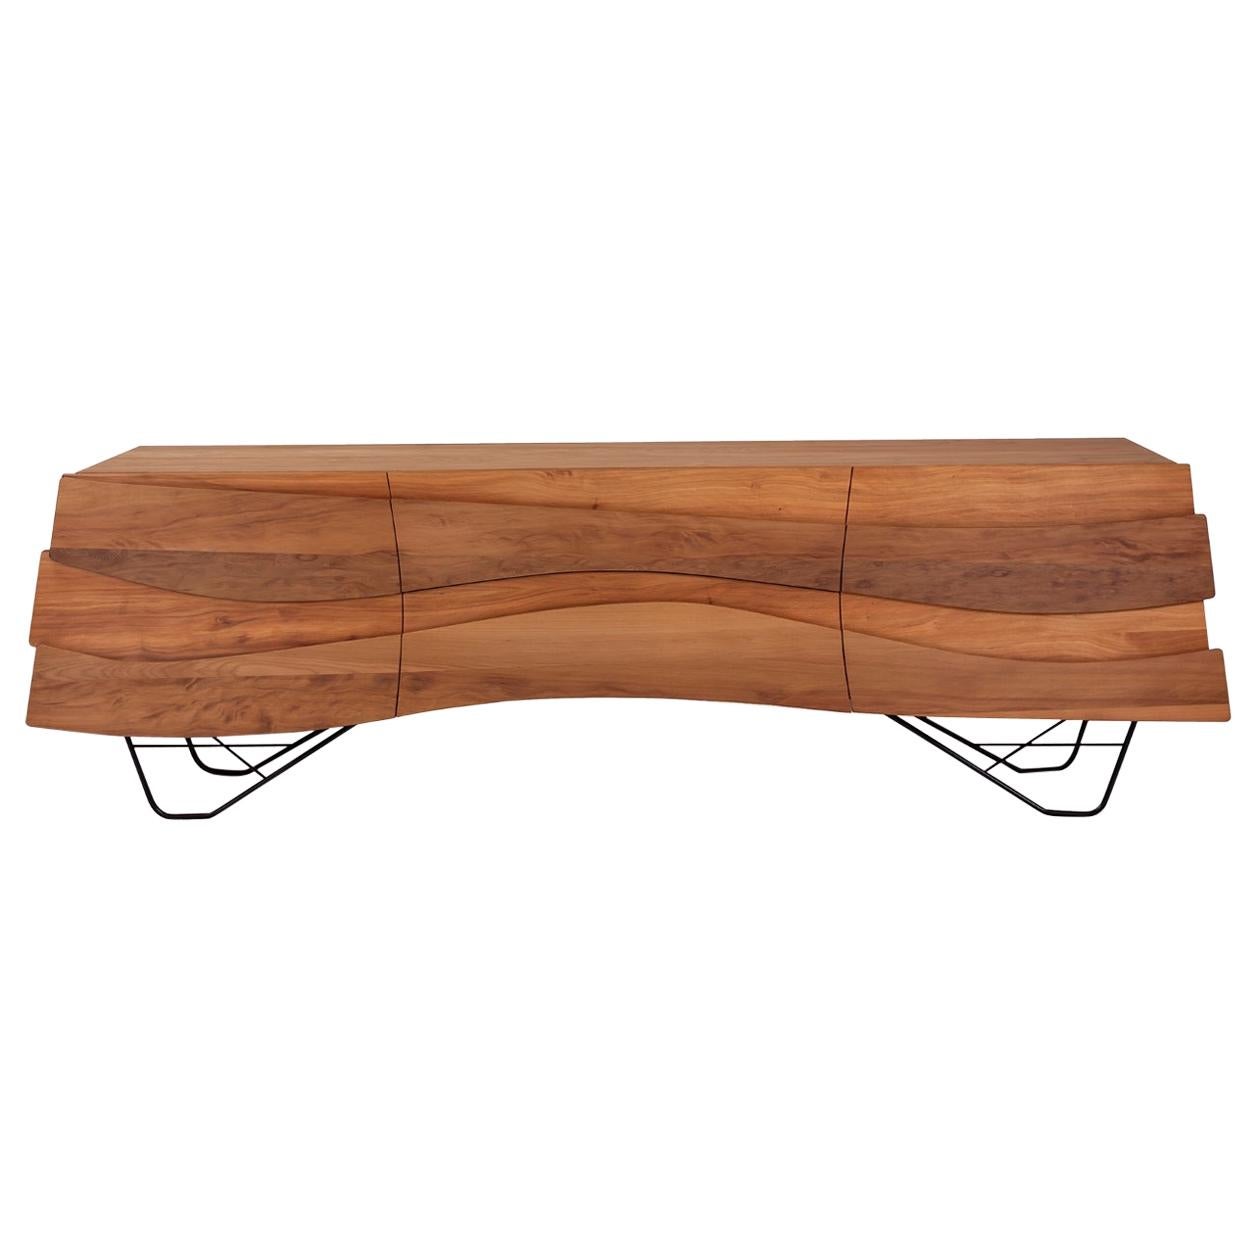 Ebb & Flow Modern Organic Credenza Made from River Rescued Ancient Wood